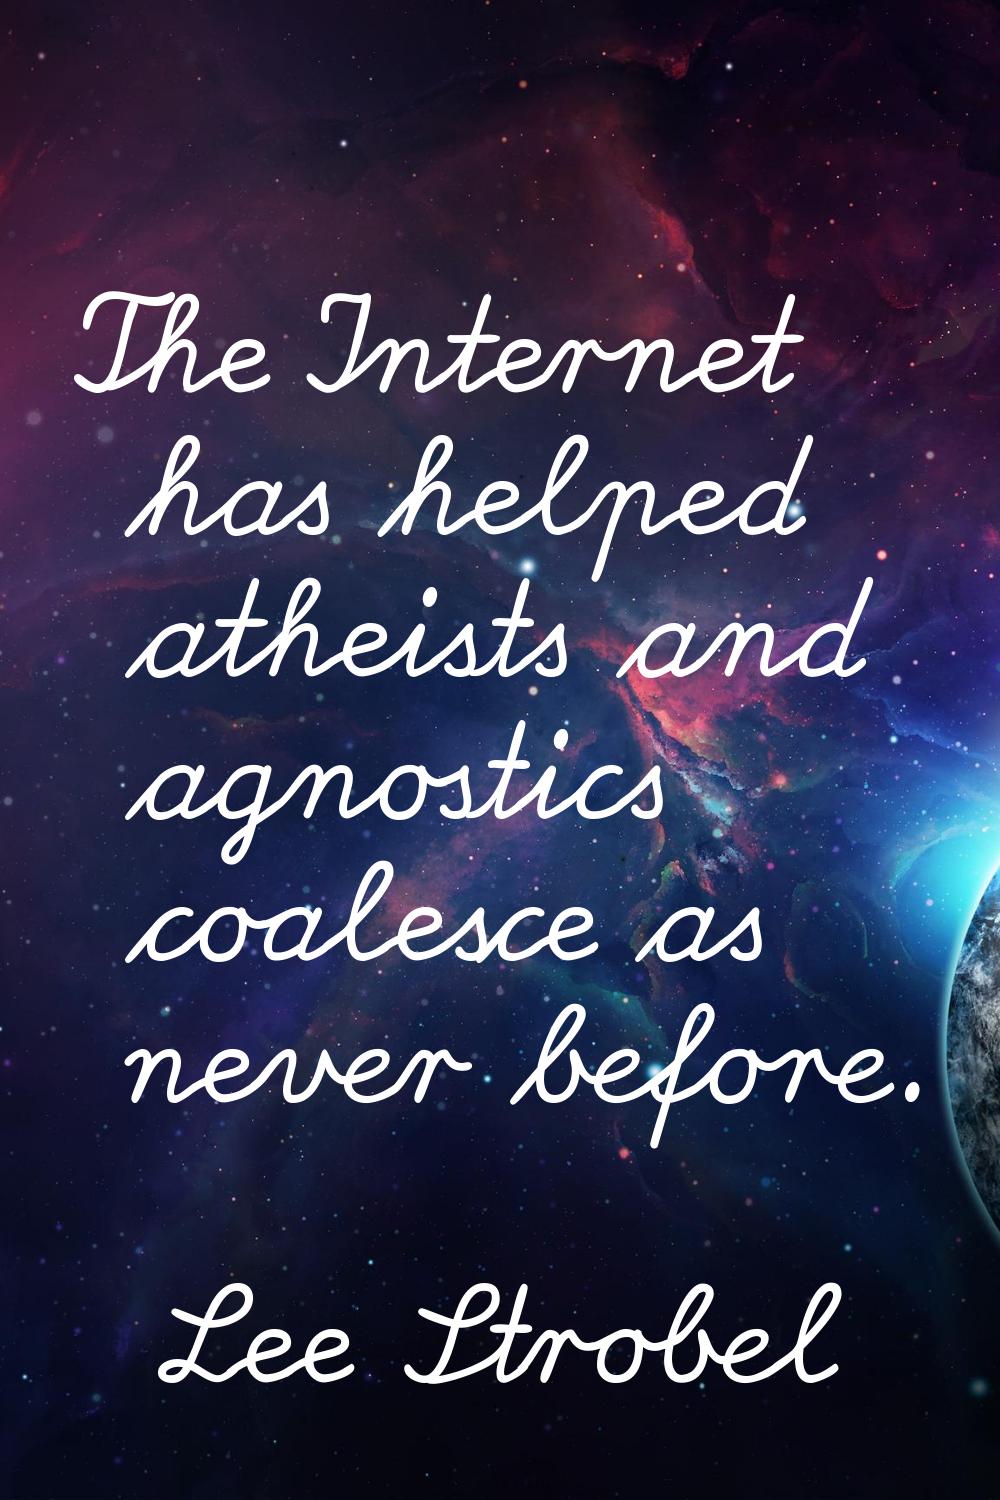 The Internet has helped atheists and agnostics coalesce as never before.